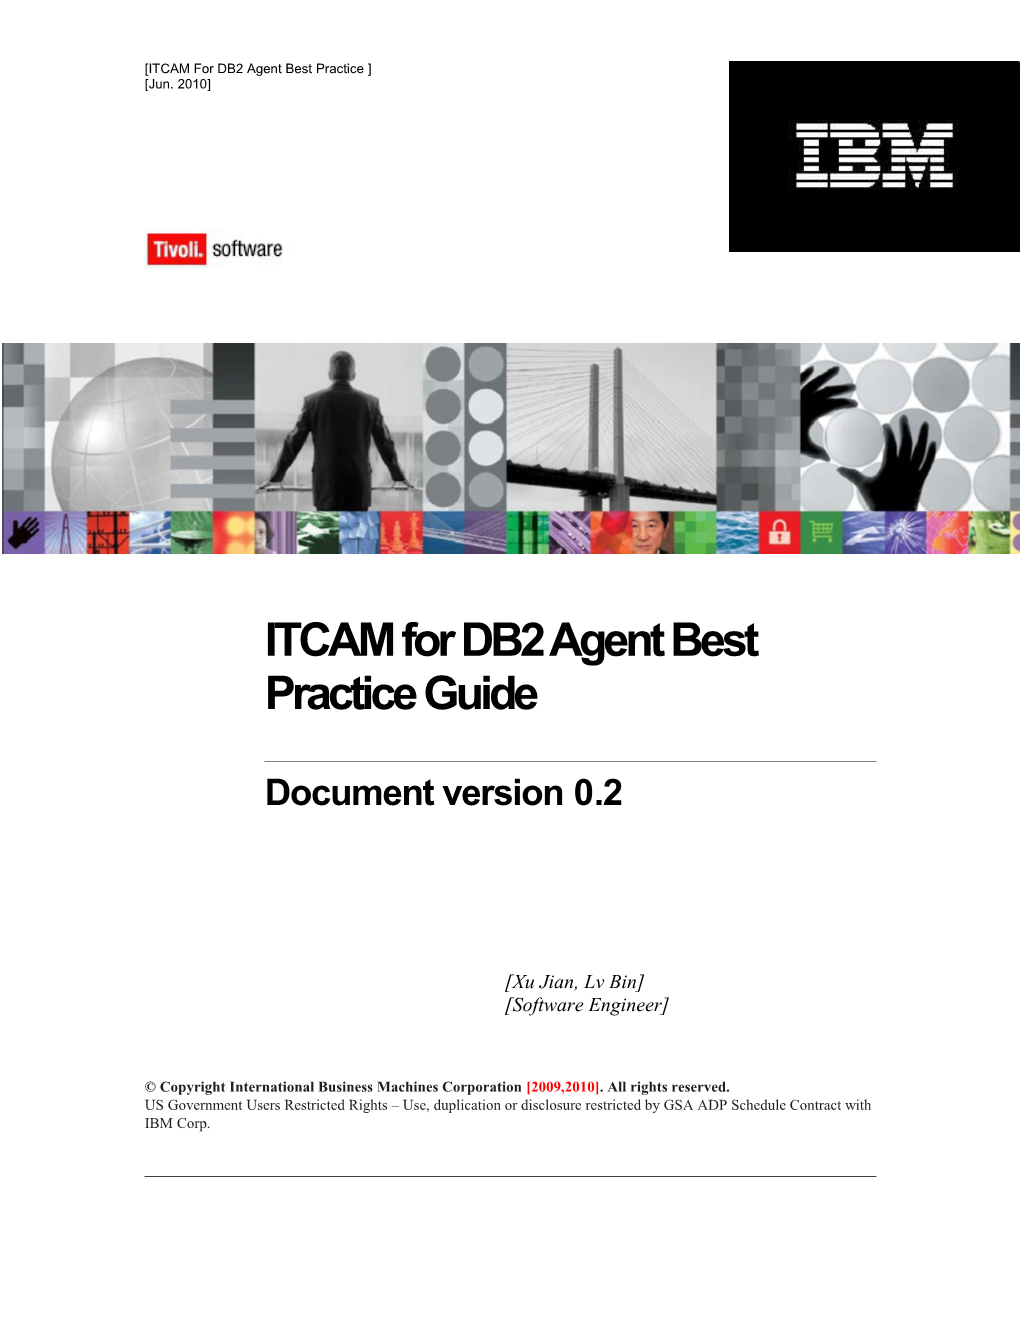 Itcamfor DB2 Agentbest Practice Guide